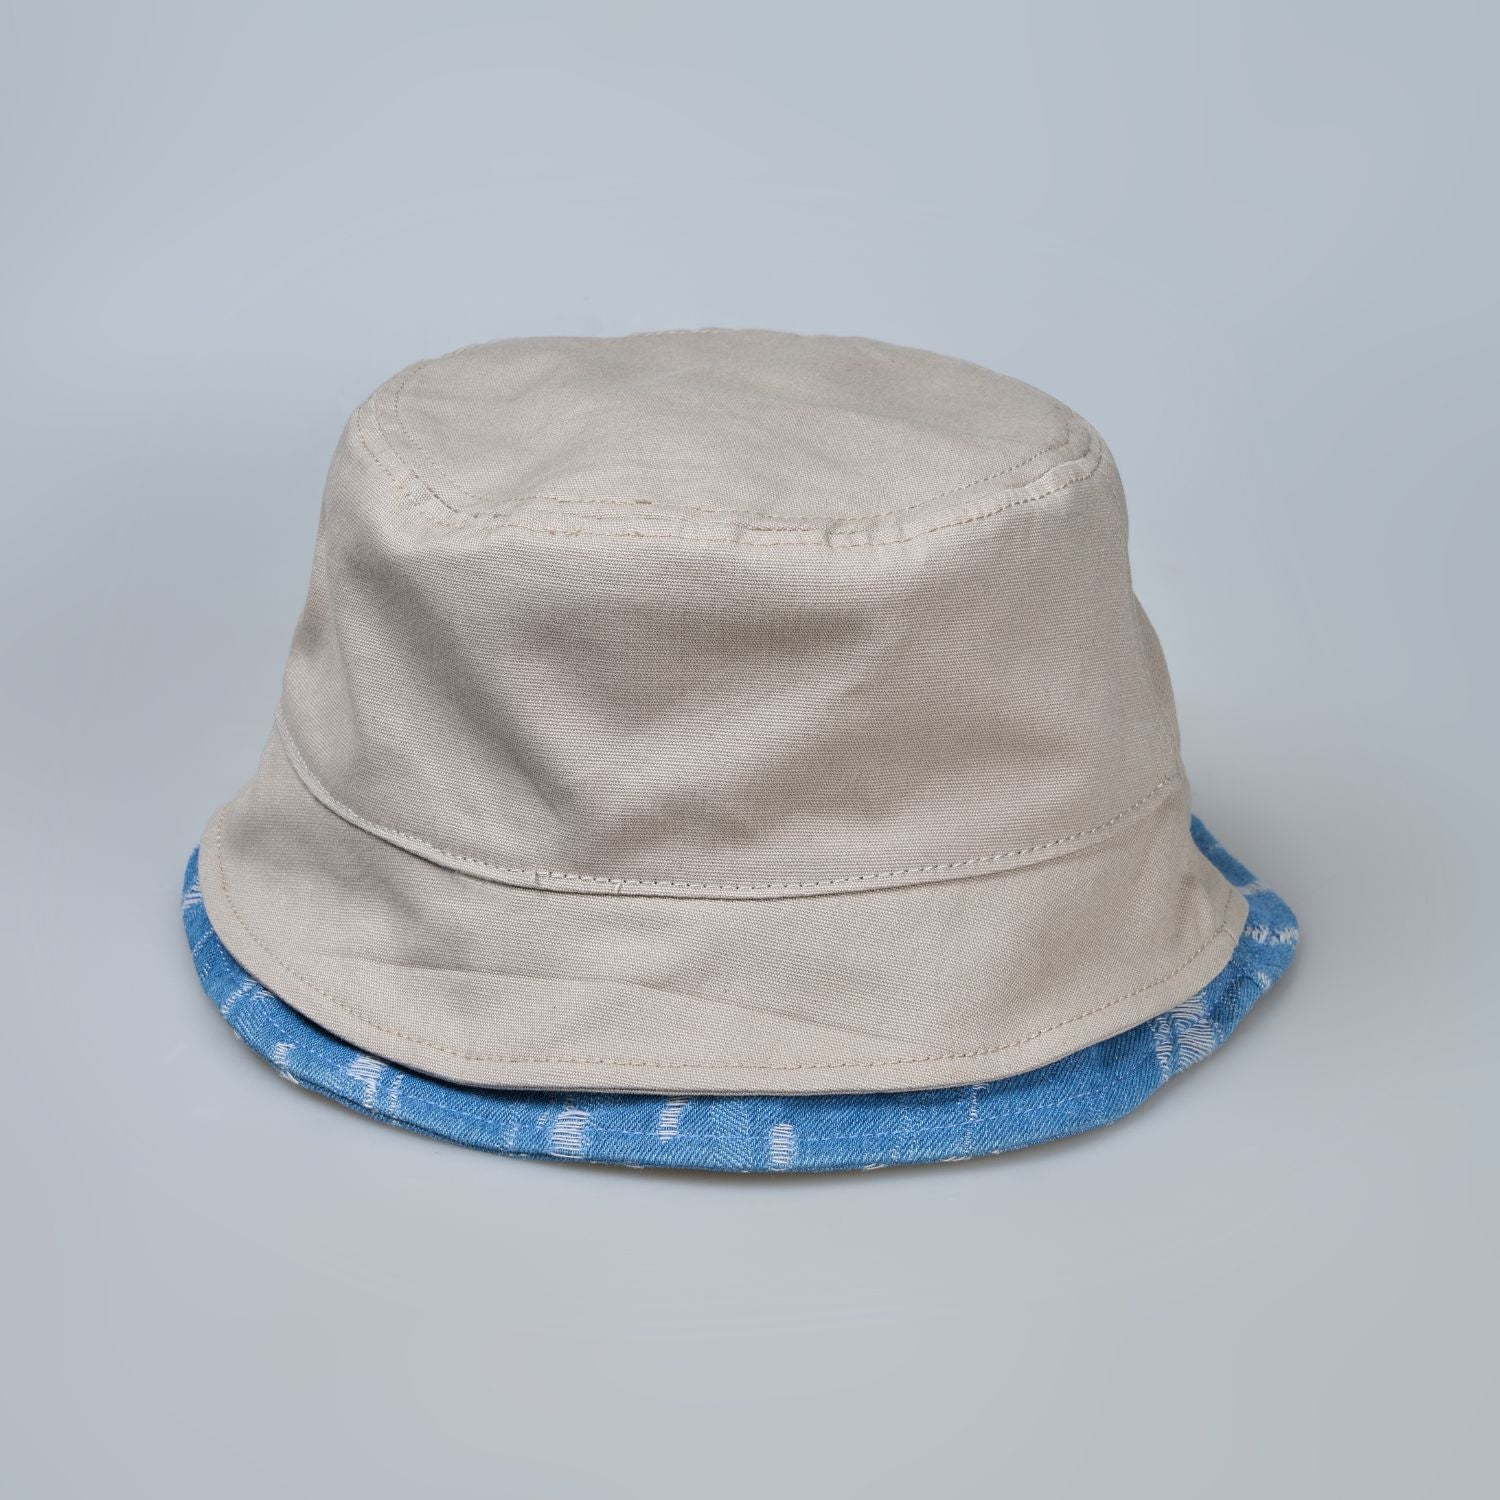 Back view of beige colored bucket hat for men